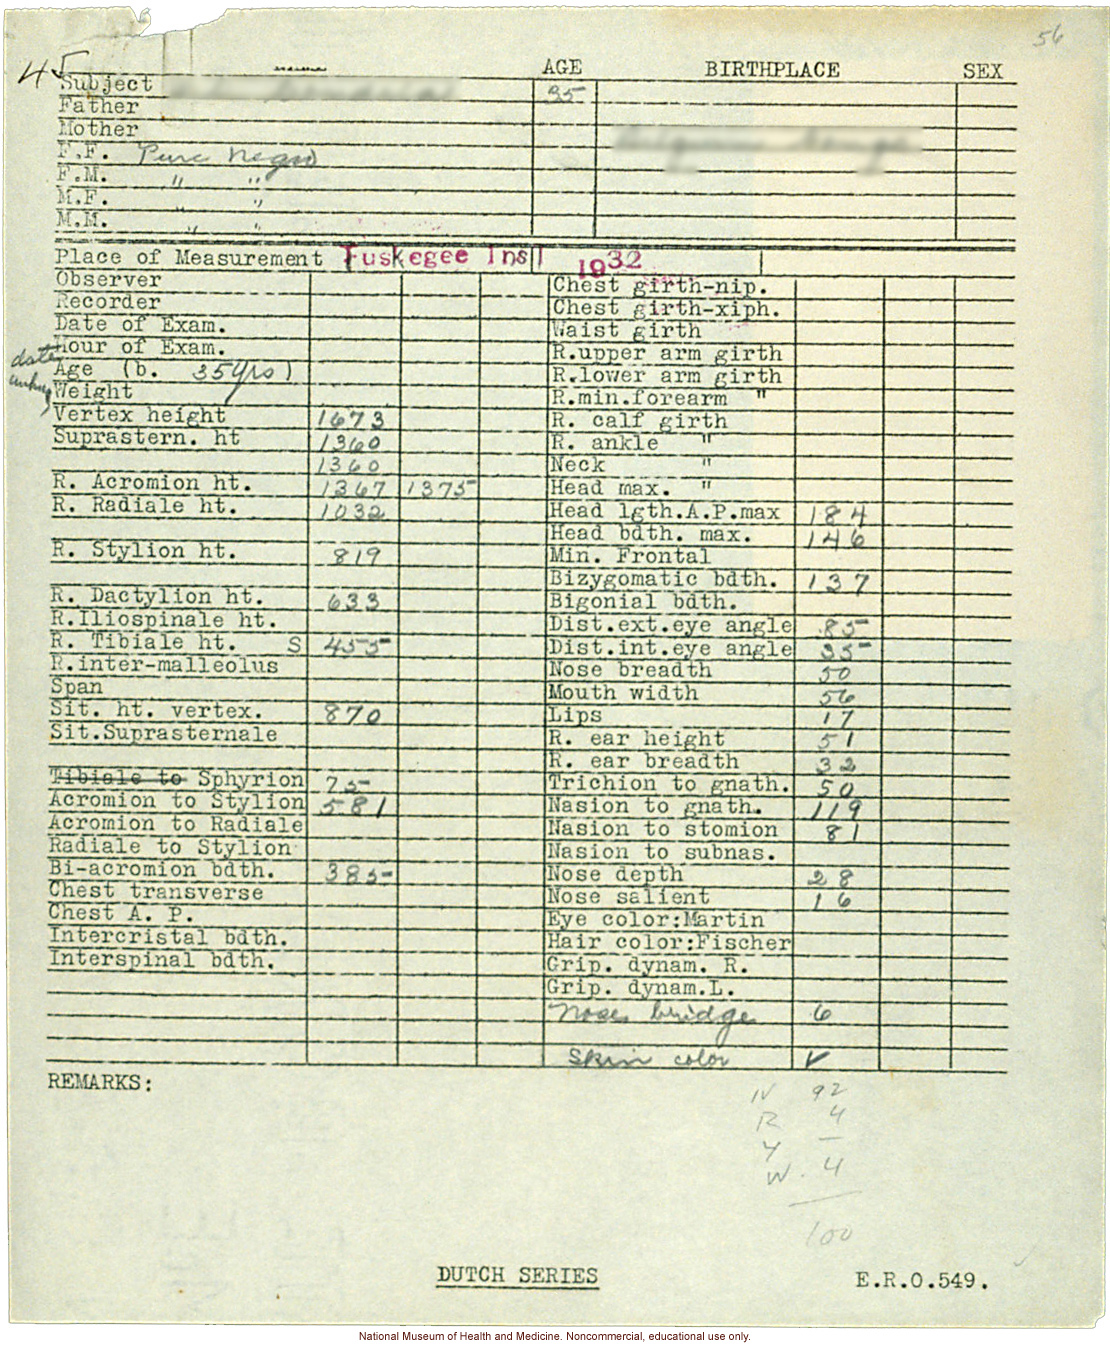 Adult male anthropometric cases, collected by Charles Davenport at Tuskegee Institute, Alabama (measurements and lineage forms)